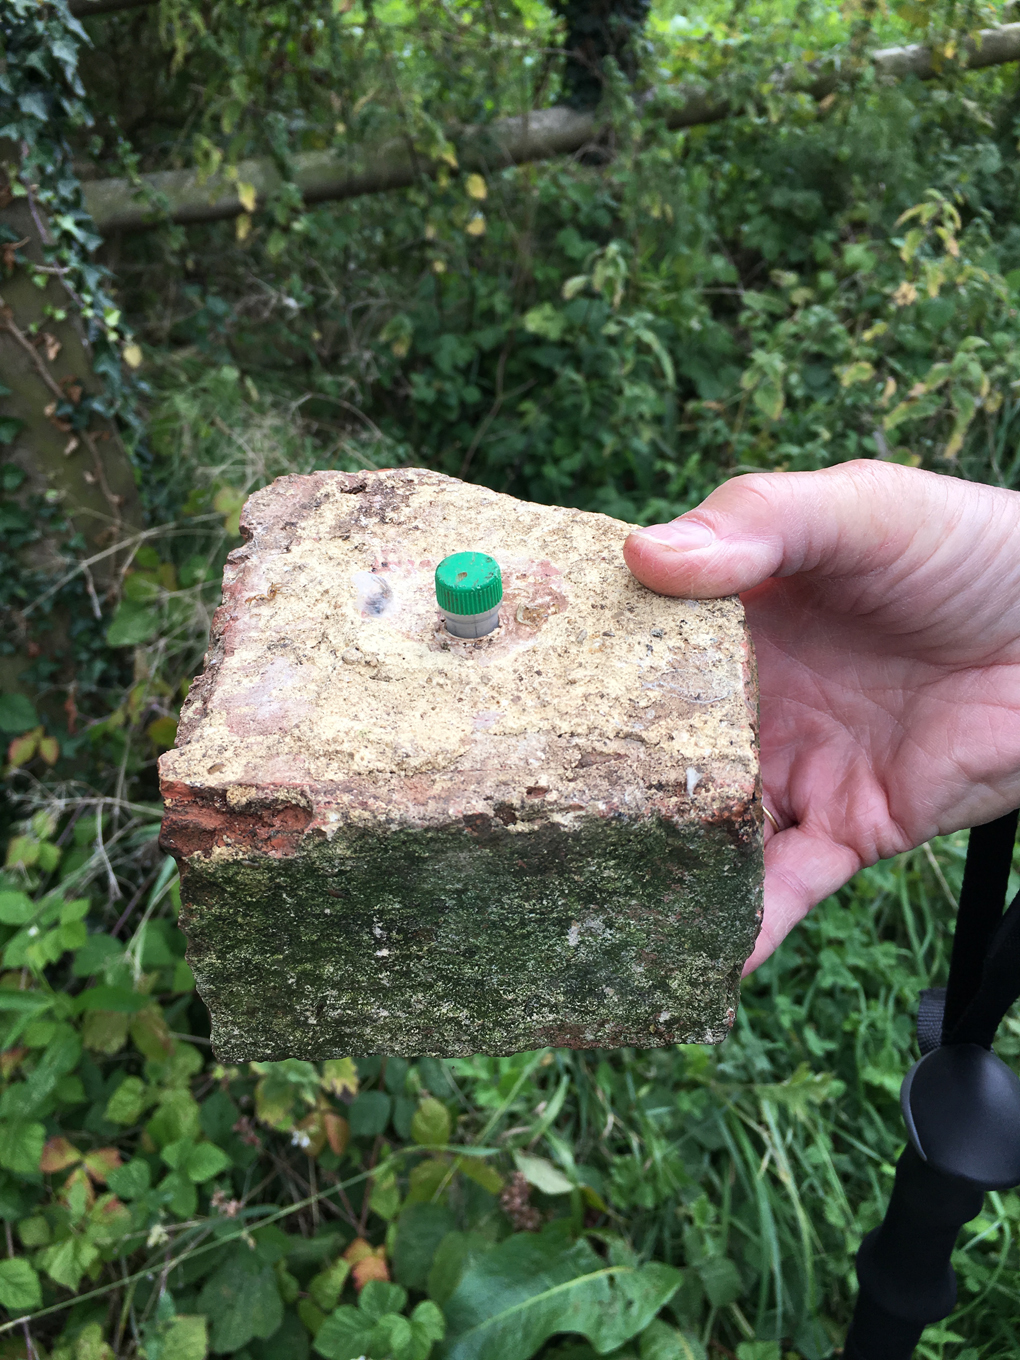 Our 500th Geocache Find